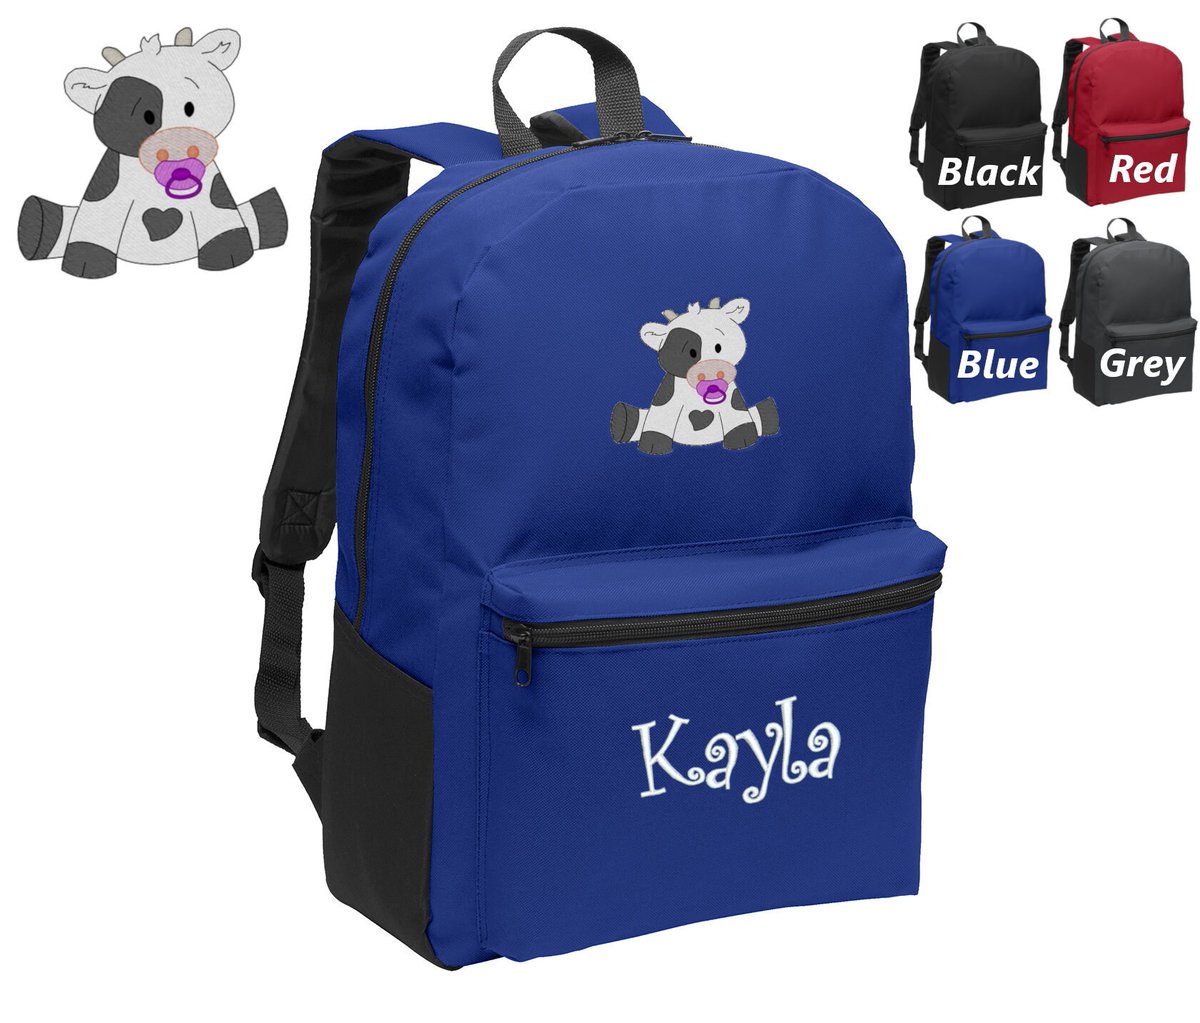 Personalized Kids Backpack Embroidered Baby Cow Monogrammed with Name of Your Choice Perfect Kids School Gift etsy.com/listing/677133…
 #BoysGift #personalized